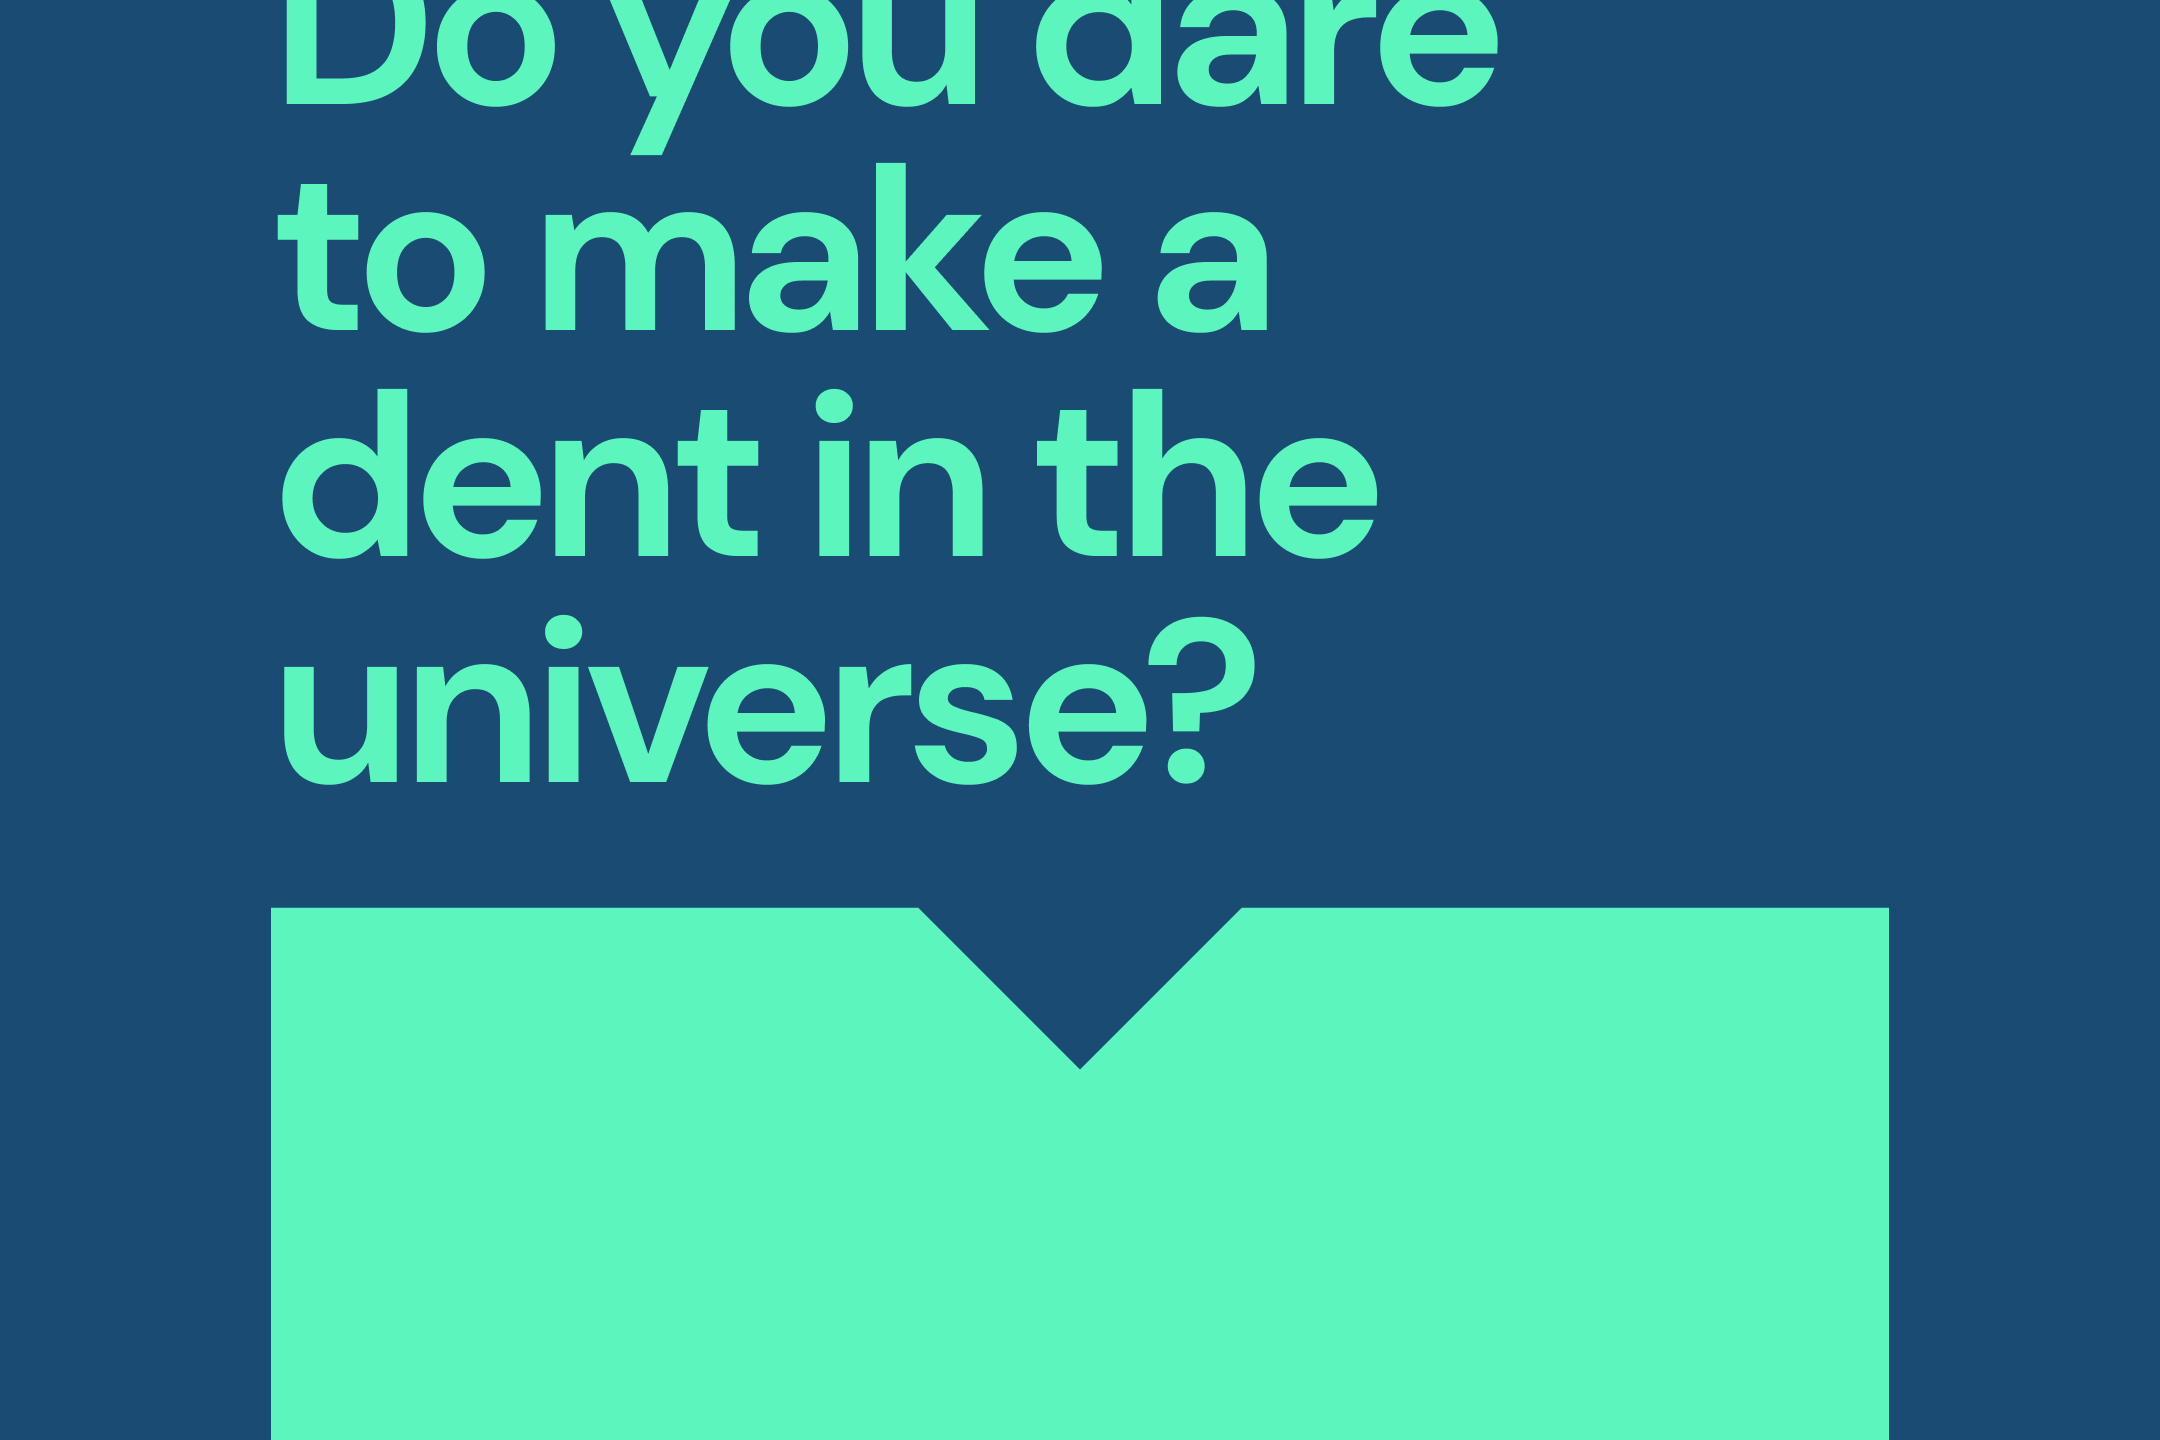 do you dare to make a dent in the universe?